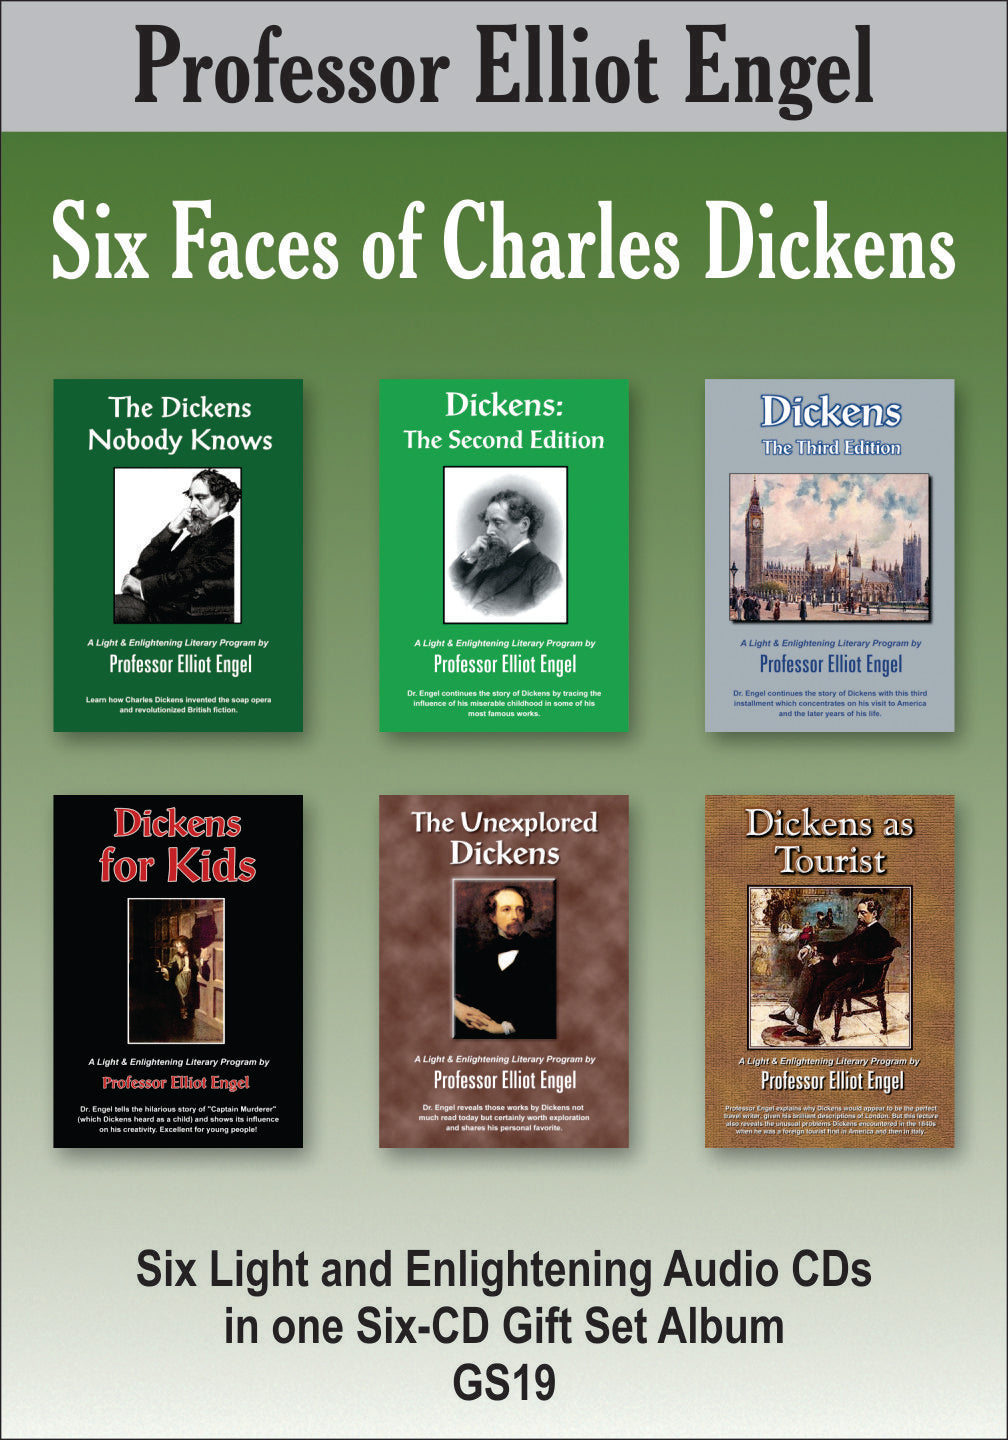 GS19 - Six Faces of Dickens (6 CD Gift Set)